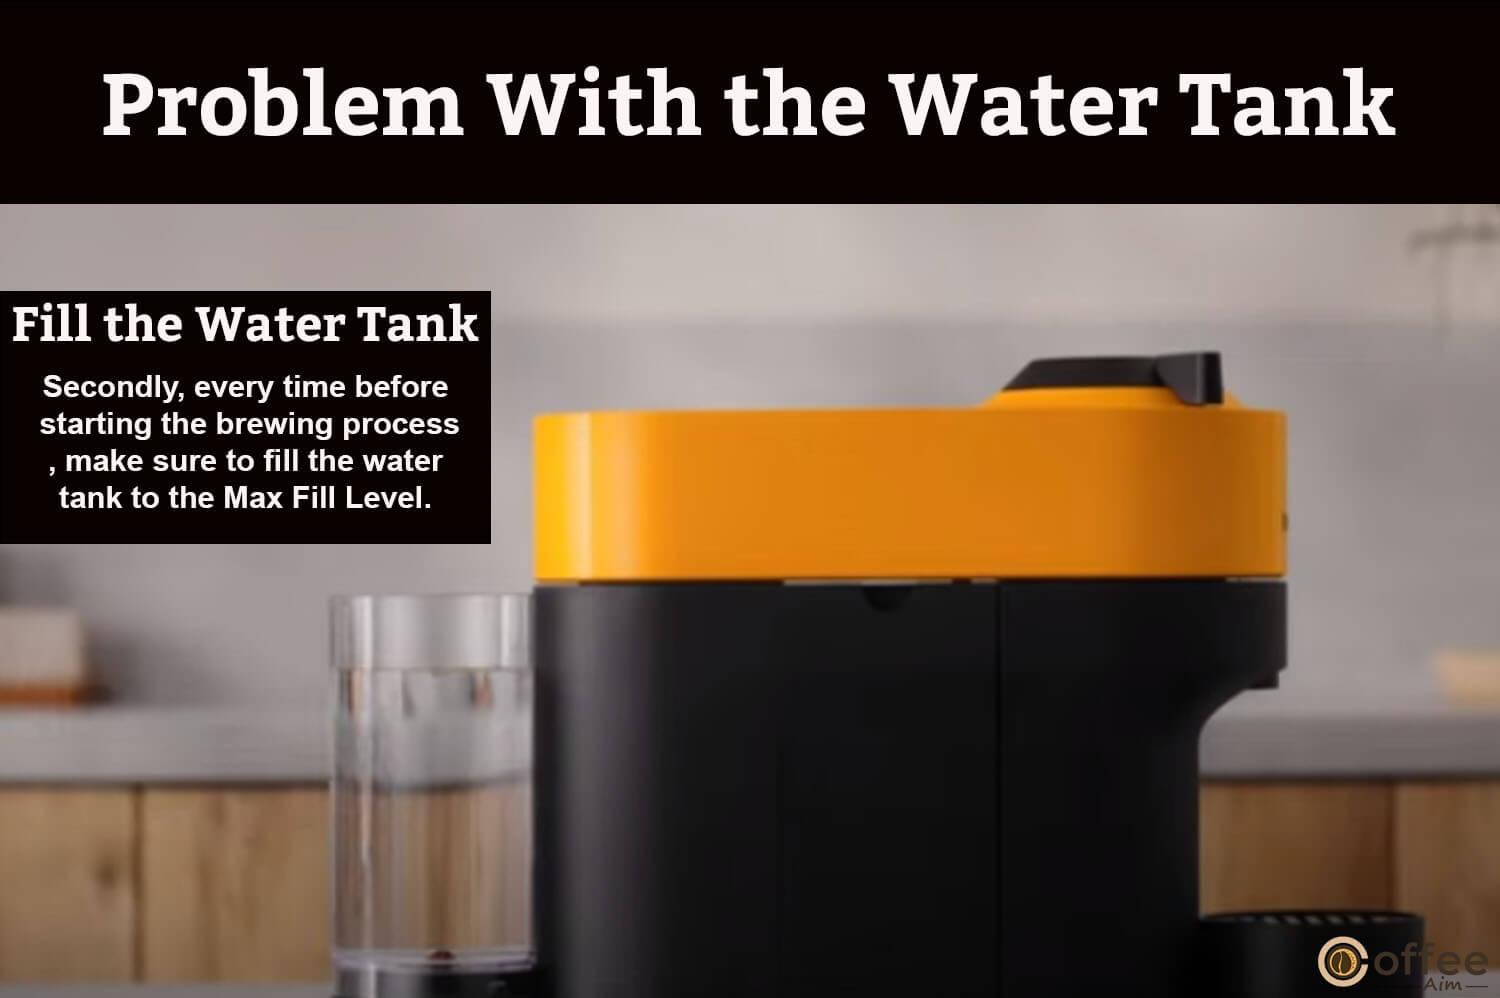 Fill the Water Tank